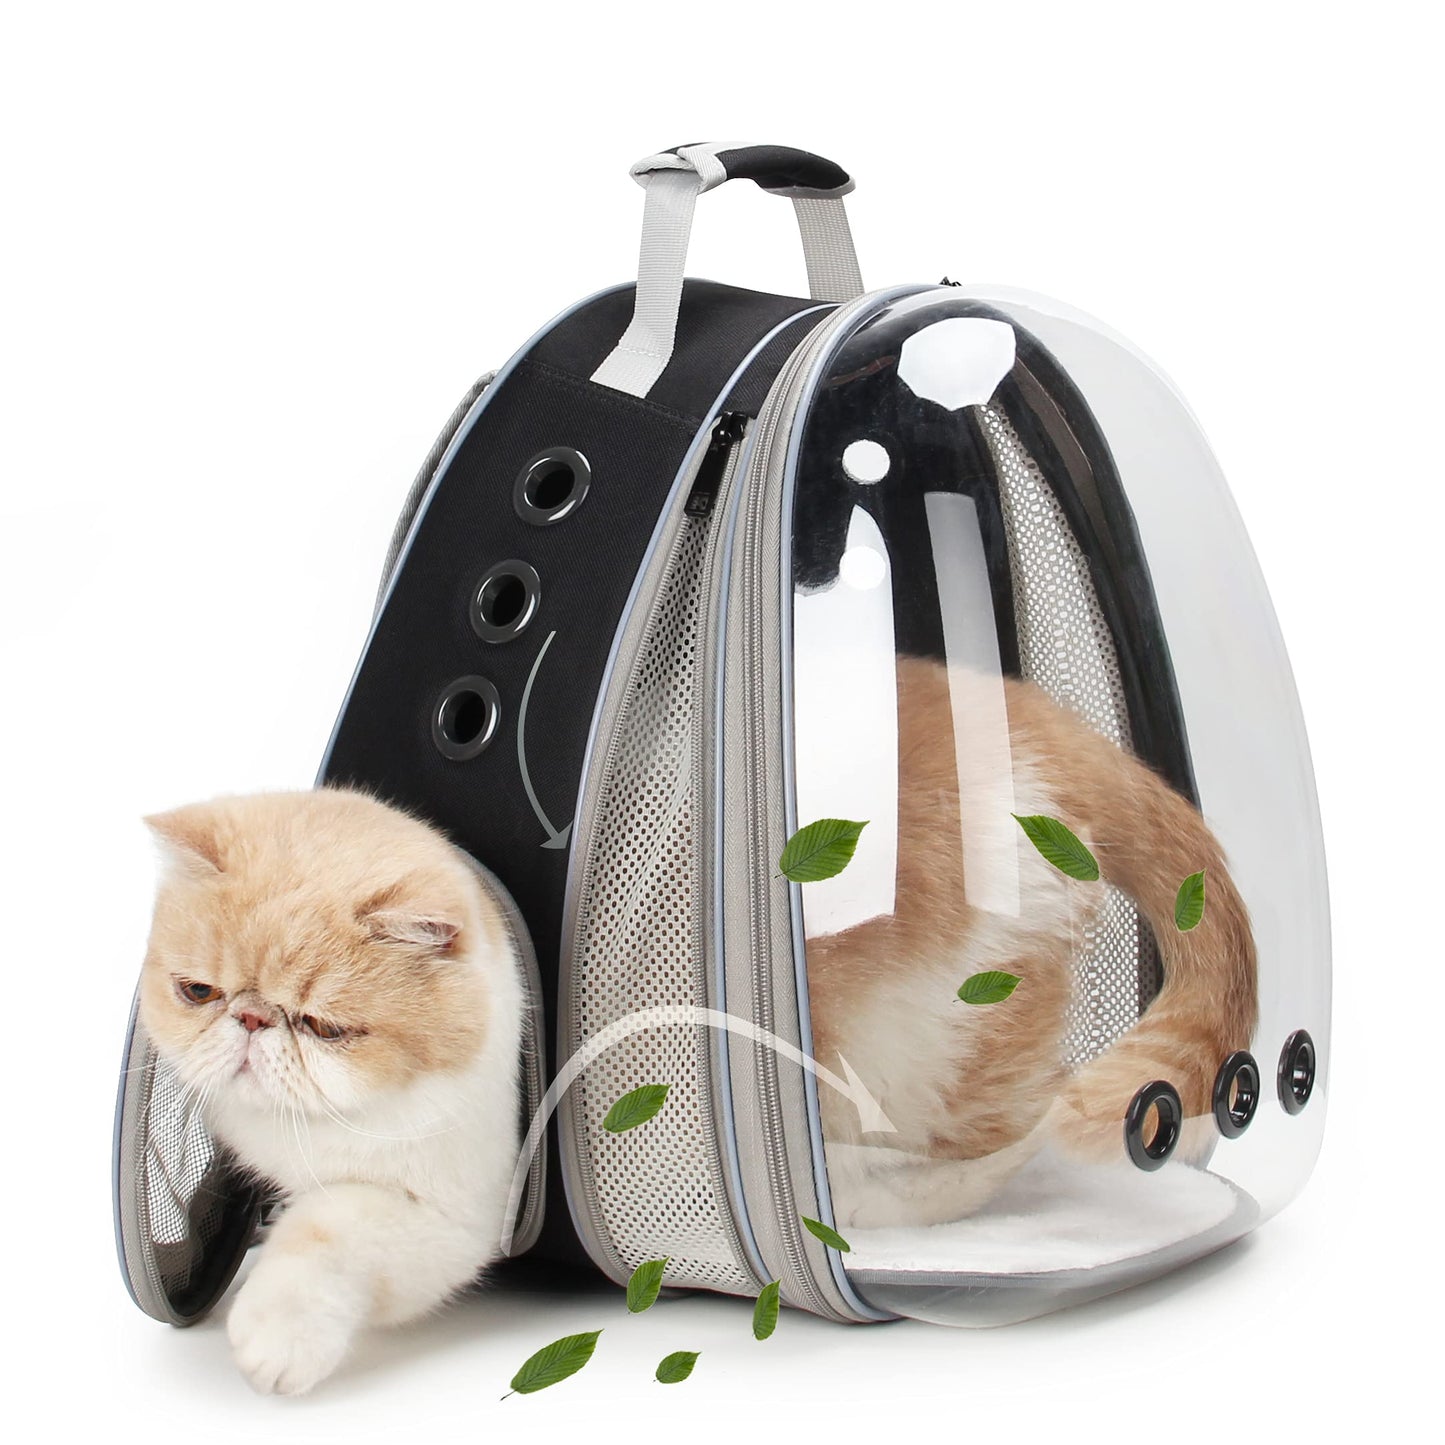 LOLLIMEOW Pet Carrier Backpack, Bubble Backpack Carrier, Cats and Puppies,Airline-Approved, Designed for Travel, Hiking, Walking & Outdoor Use